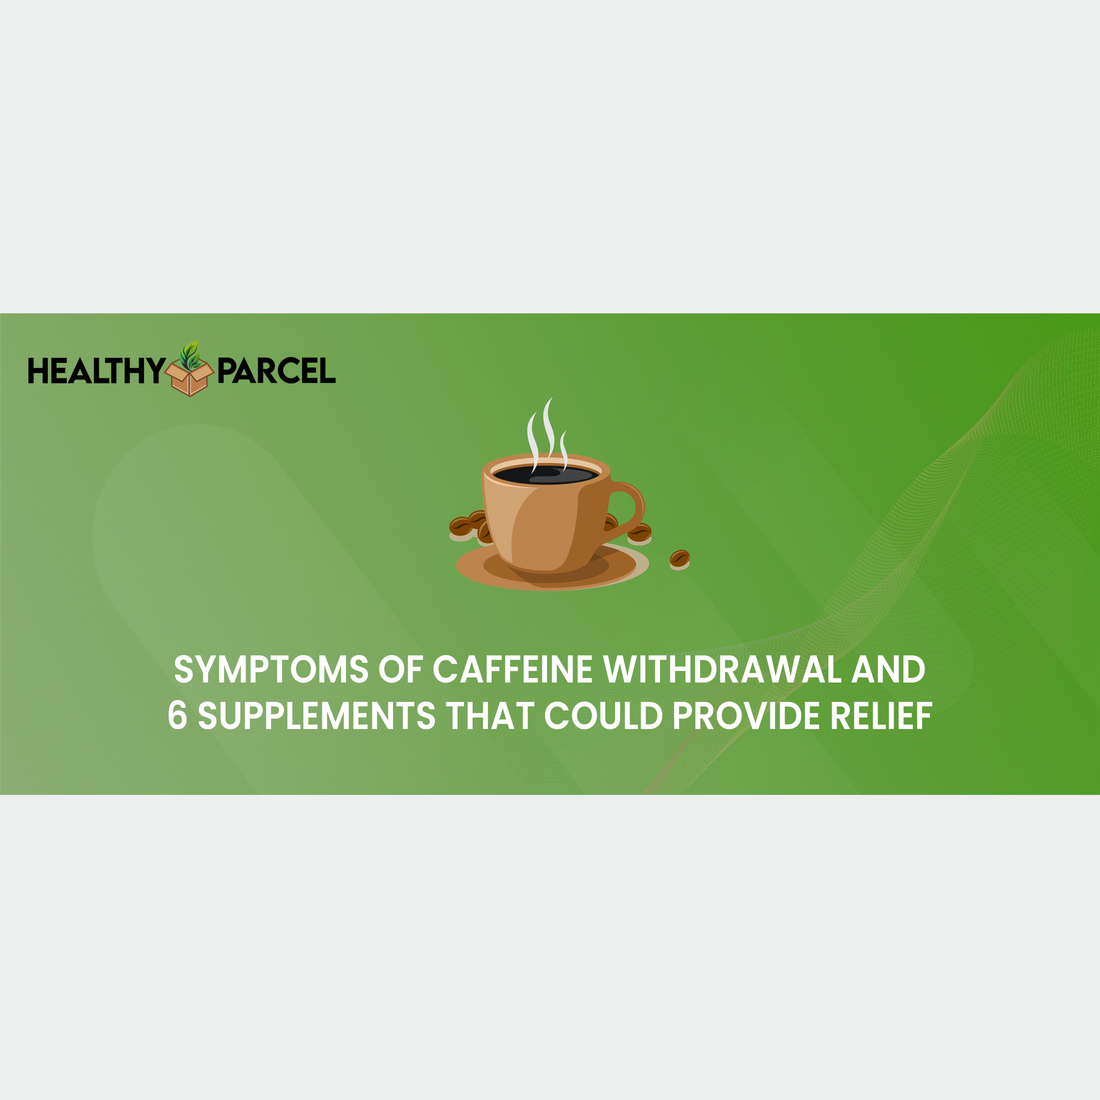 Symptoms of Caffeine Withdrawal and 6 Supplements That Could Provide Relief